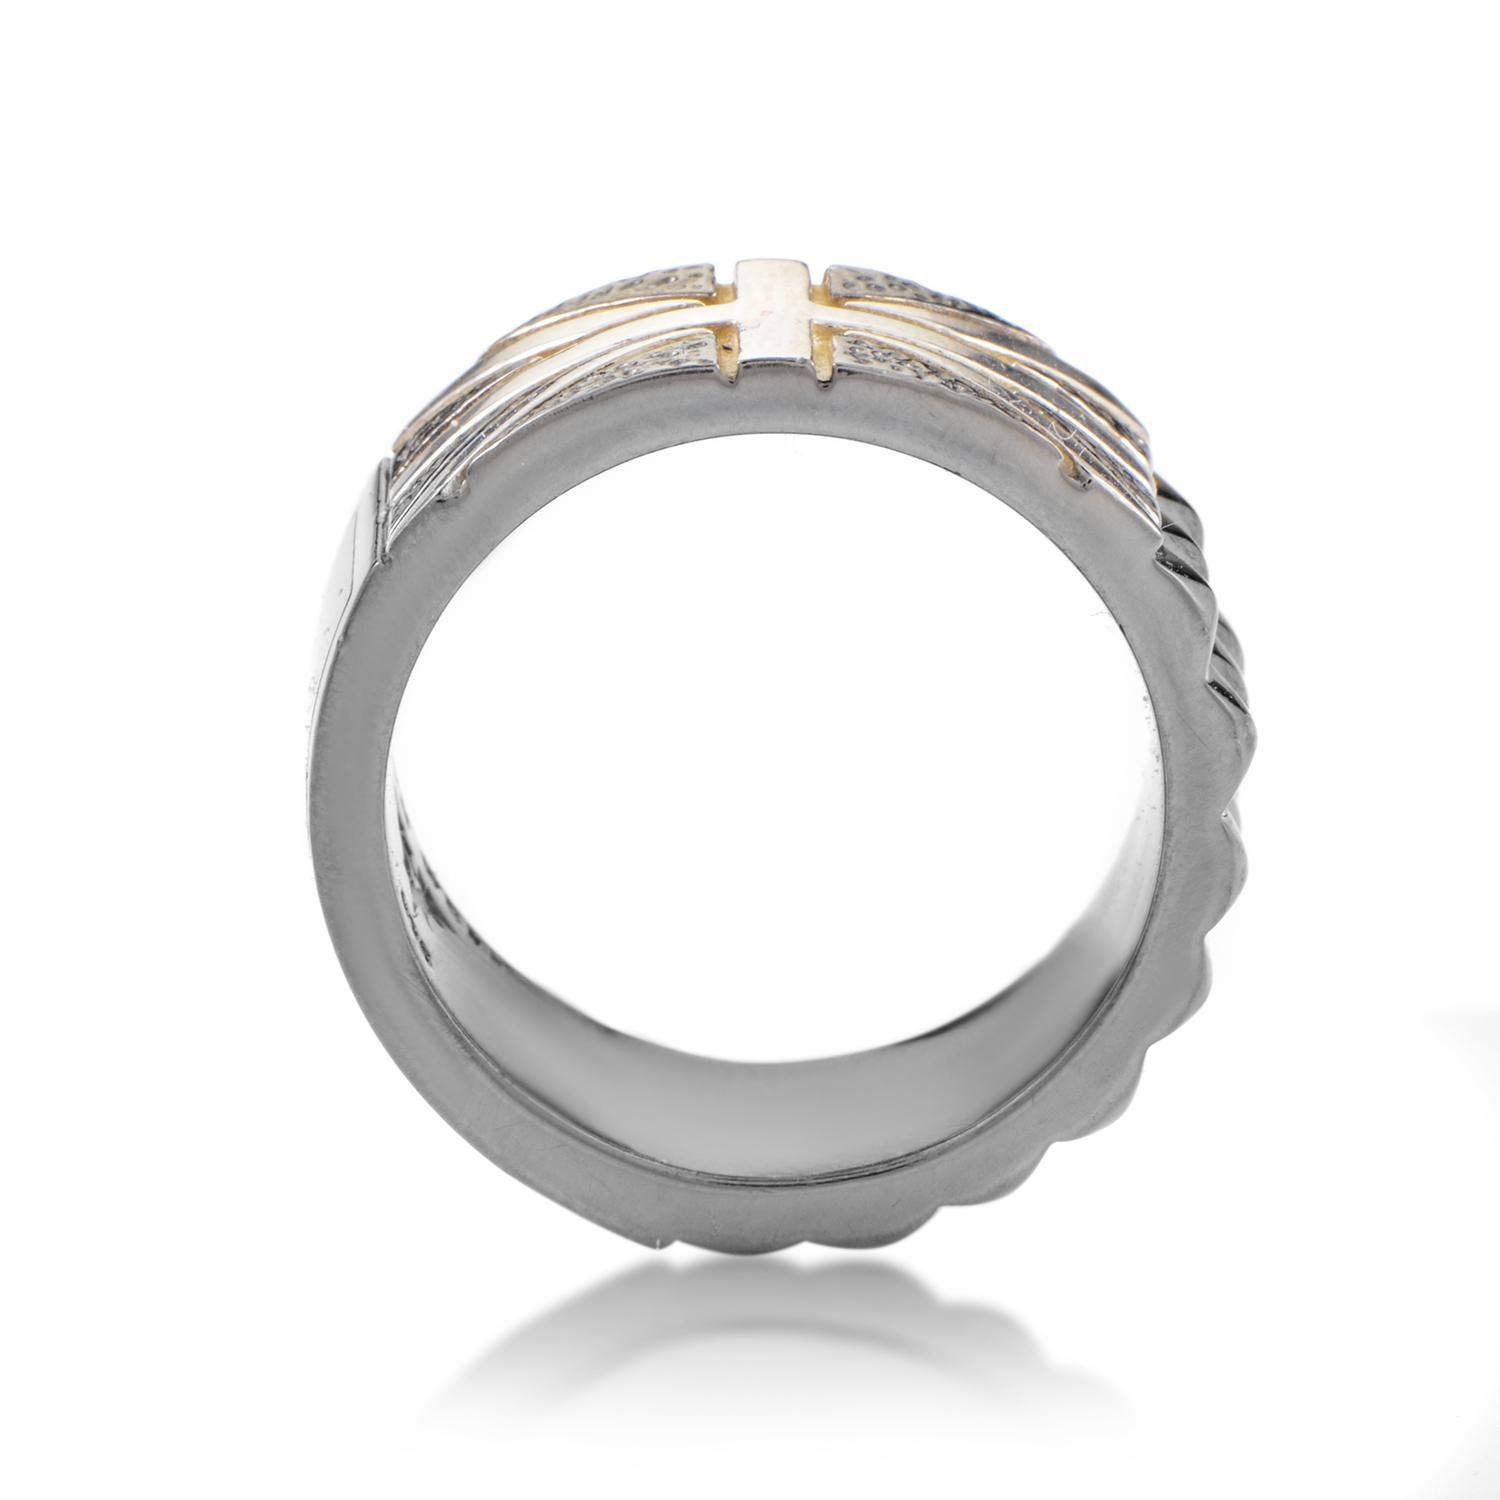 A seemingly simple and classic design of this splendid ring features interesting elements along the length of its surface, offering an exceptionally eye-catching appearance. The ring is presented by Stephen Webster and designed for the exemplary